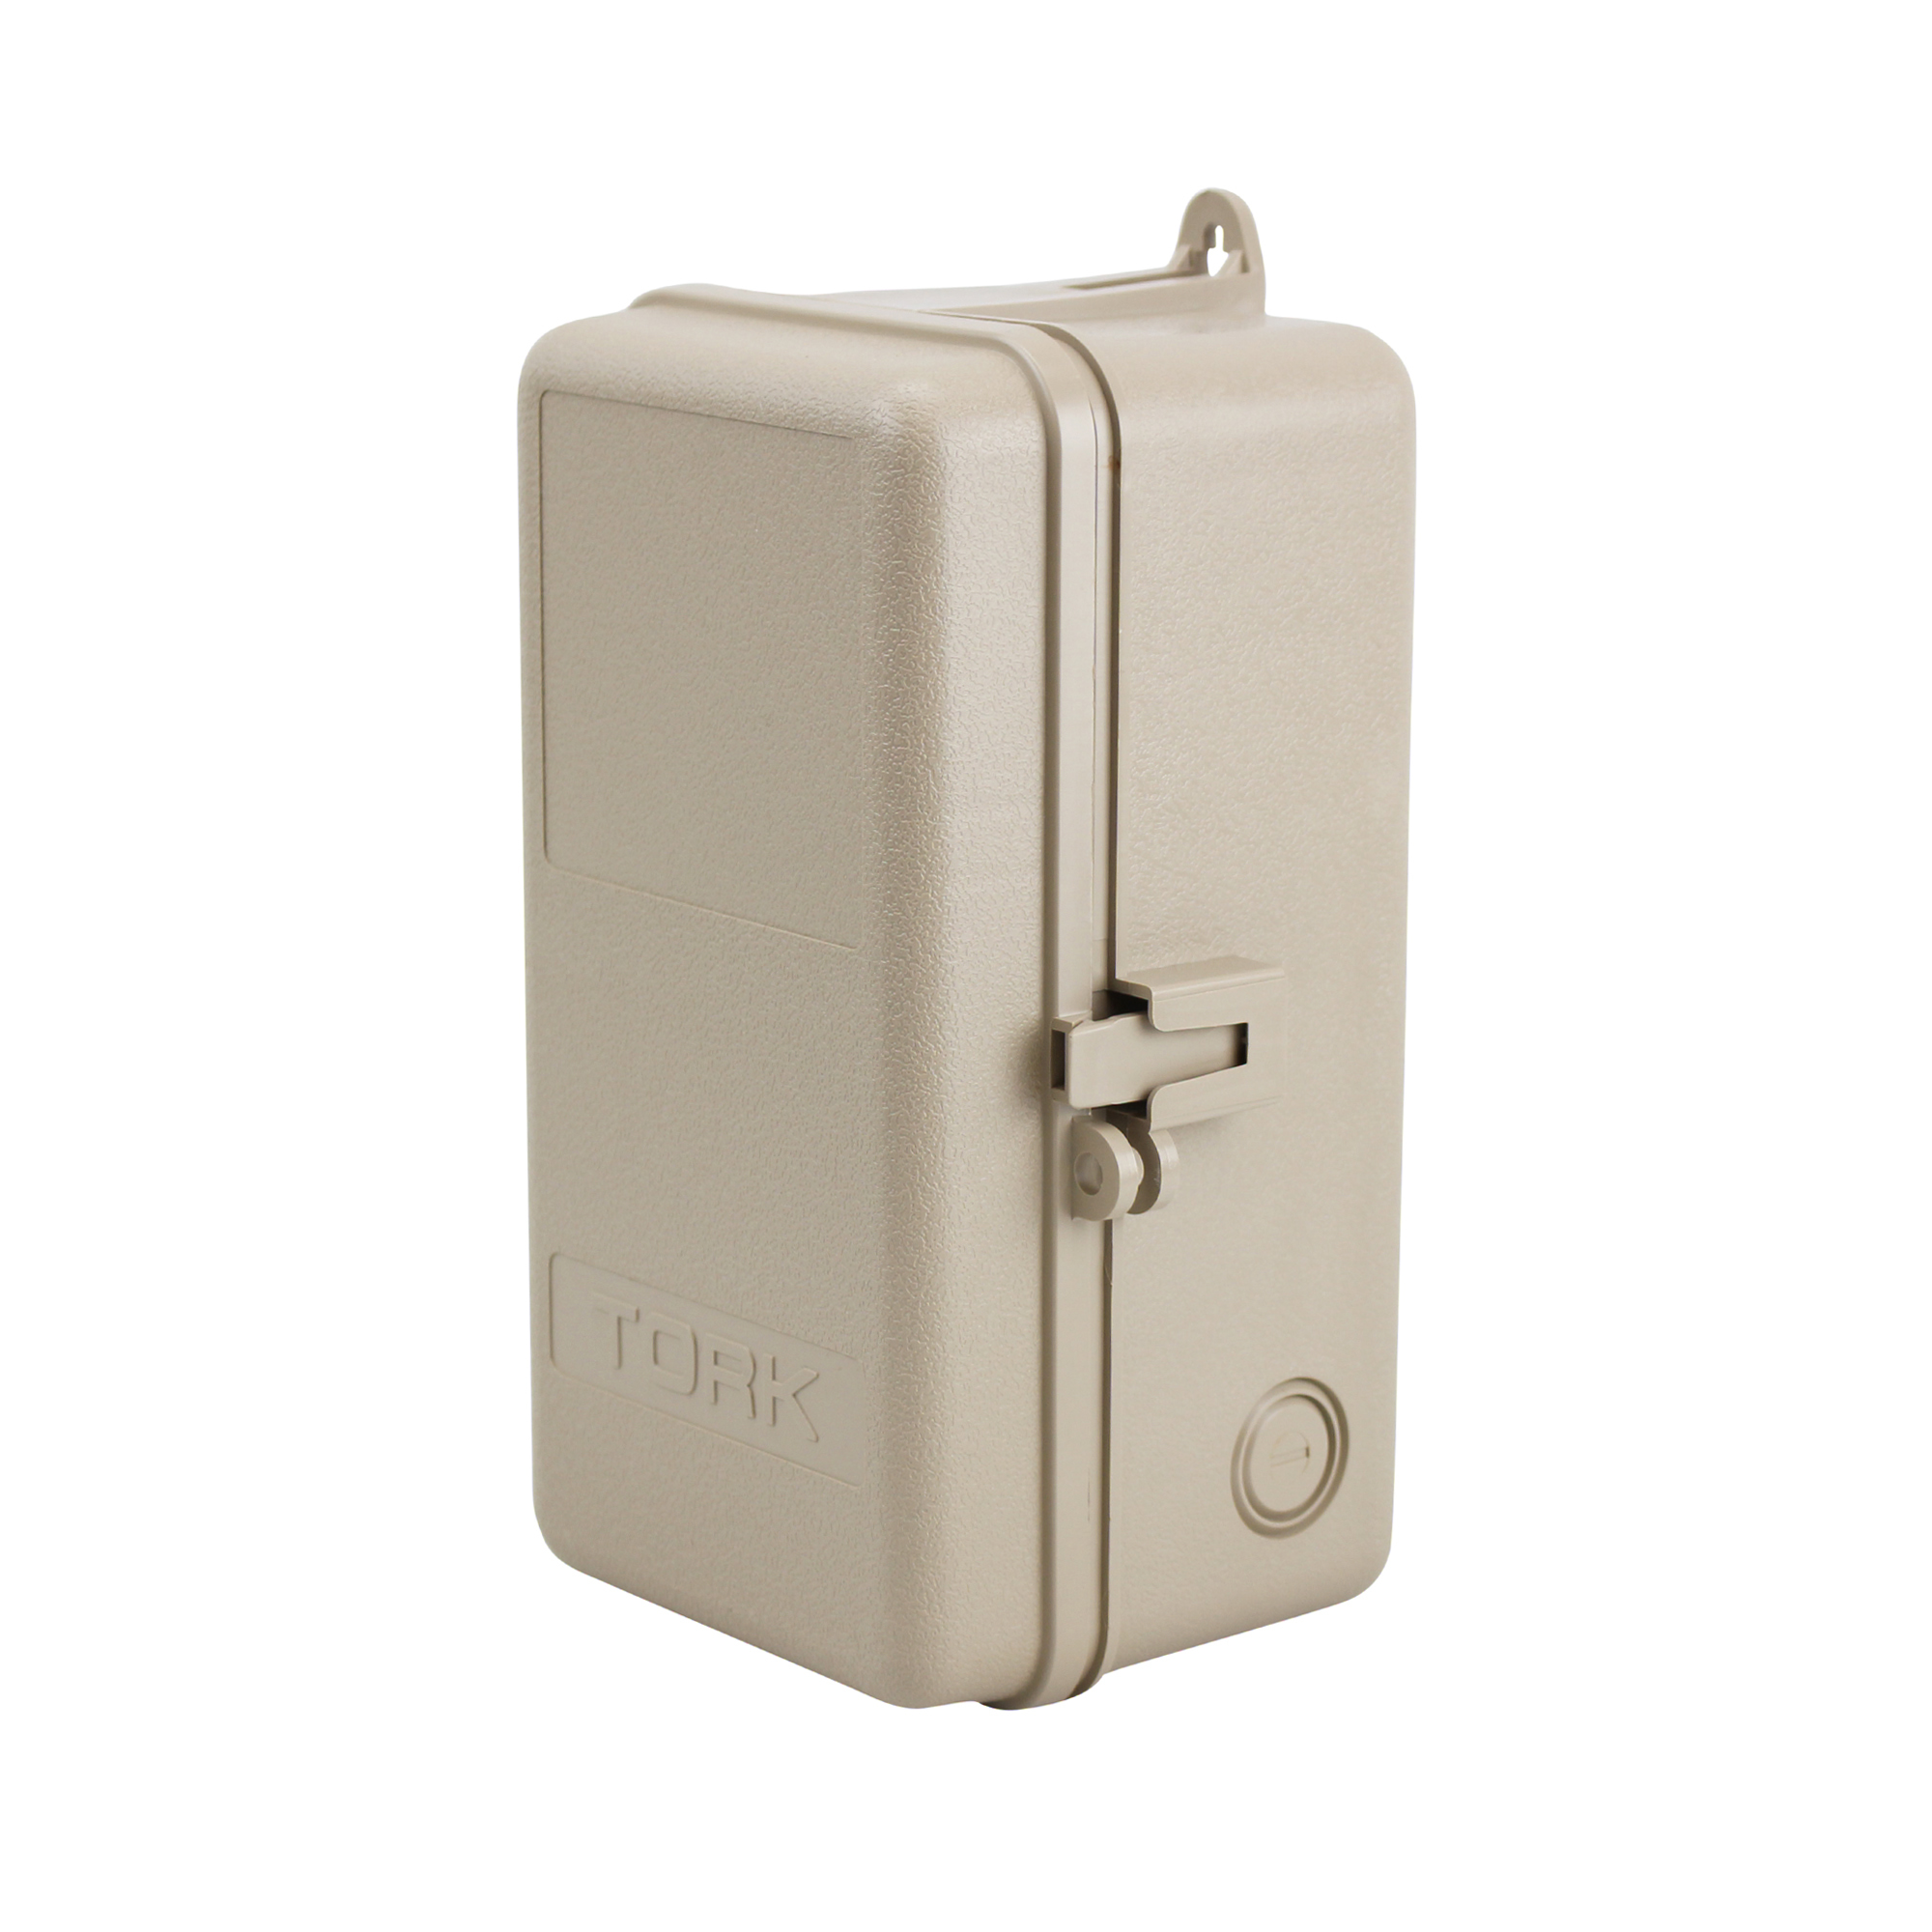 NSI Industries Tork DG280A-24 Signaling and Duty Cycle 24 Hour Time Switch with 2 Channel, 24 VAC 50/60 Hz Input Supply, SPDT Output Contact - image 3 of 4